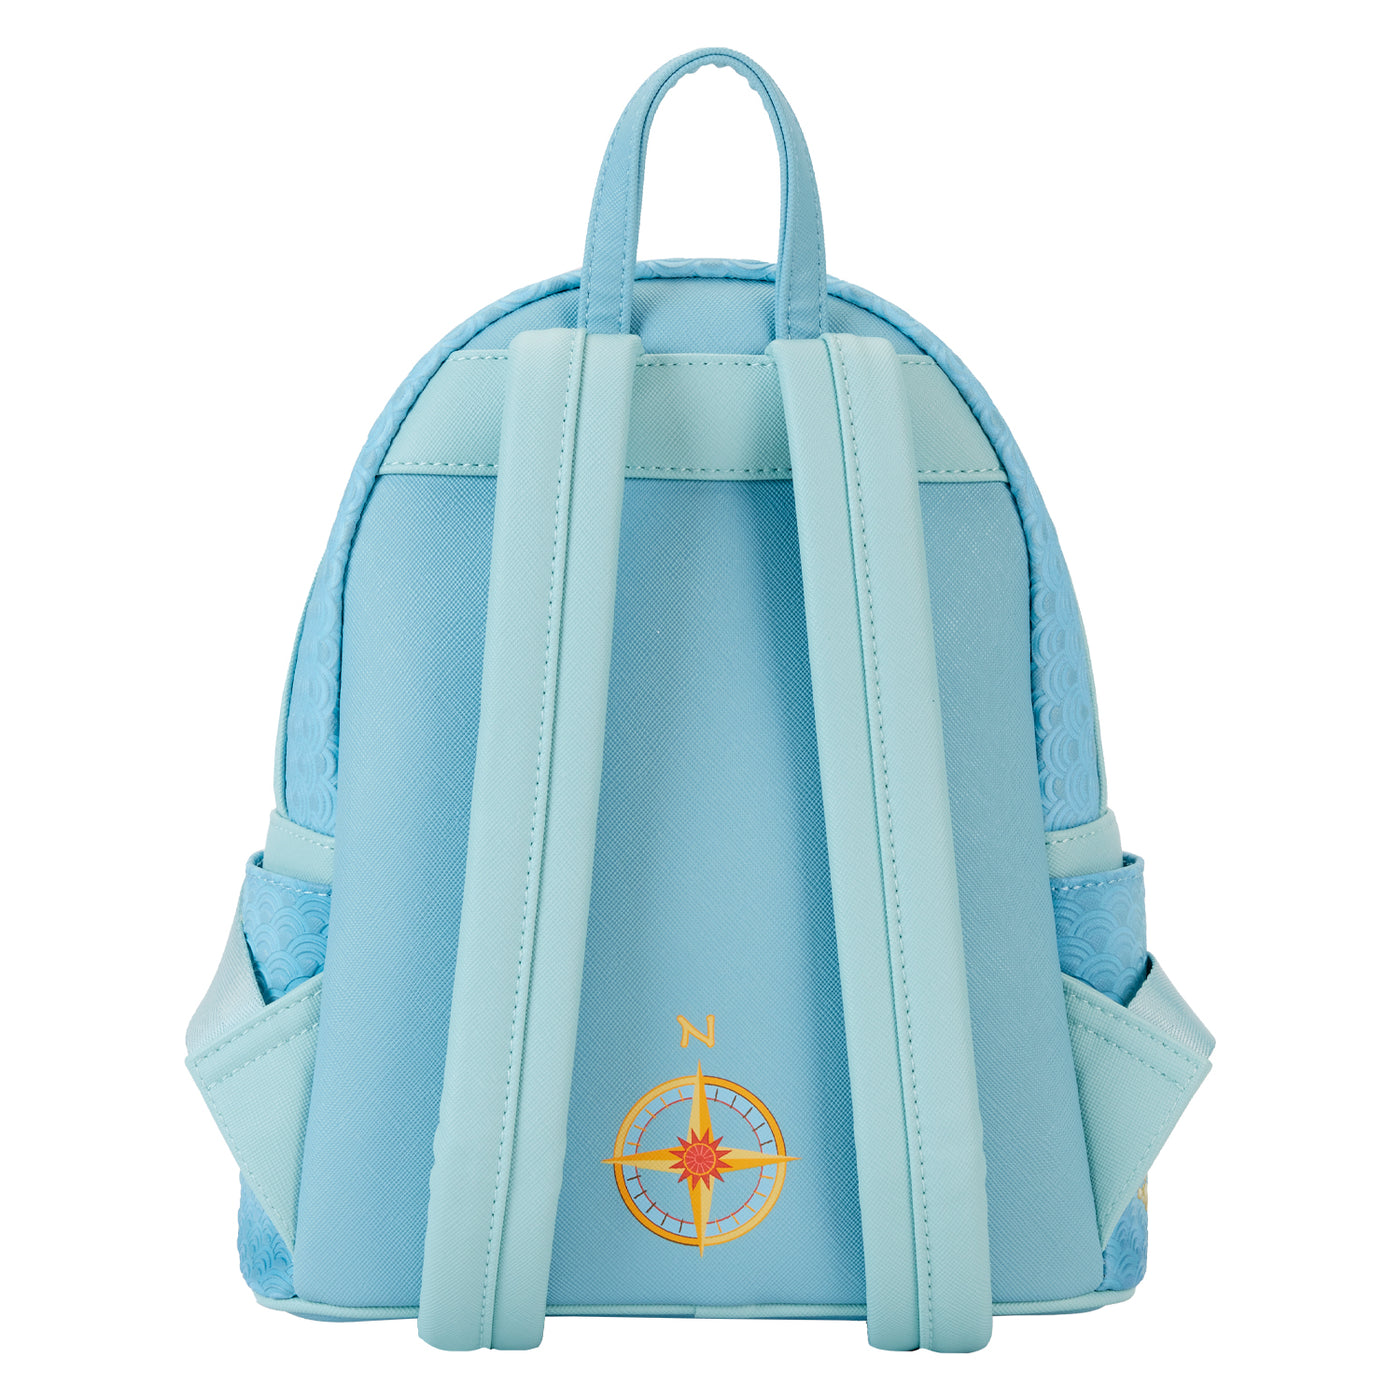 Loungefly Nickelodeon Avatar: The Last Airbender Map Mini Backpack